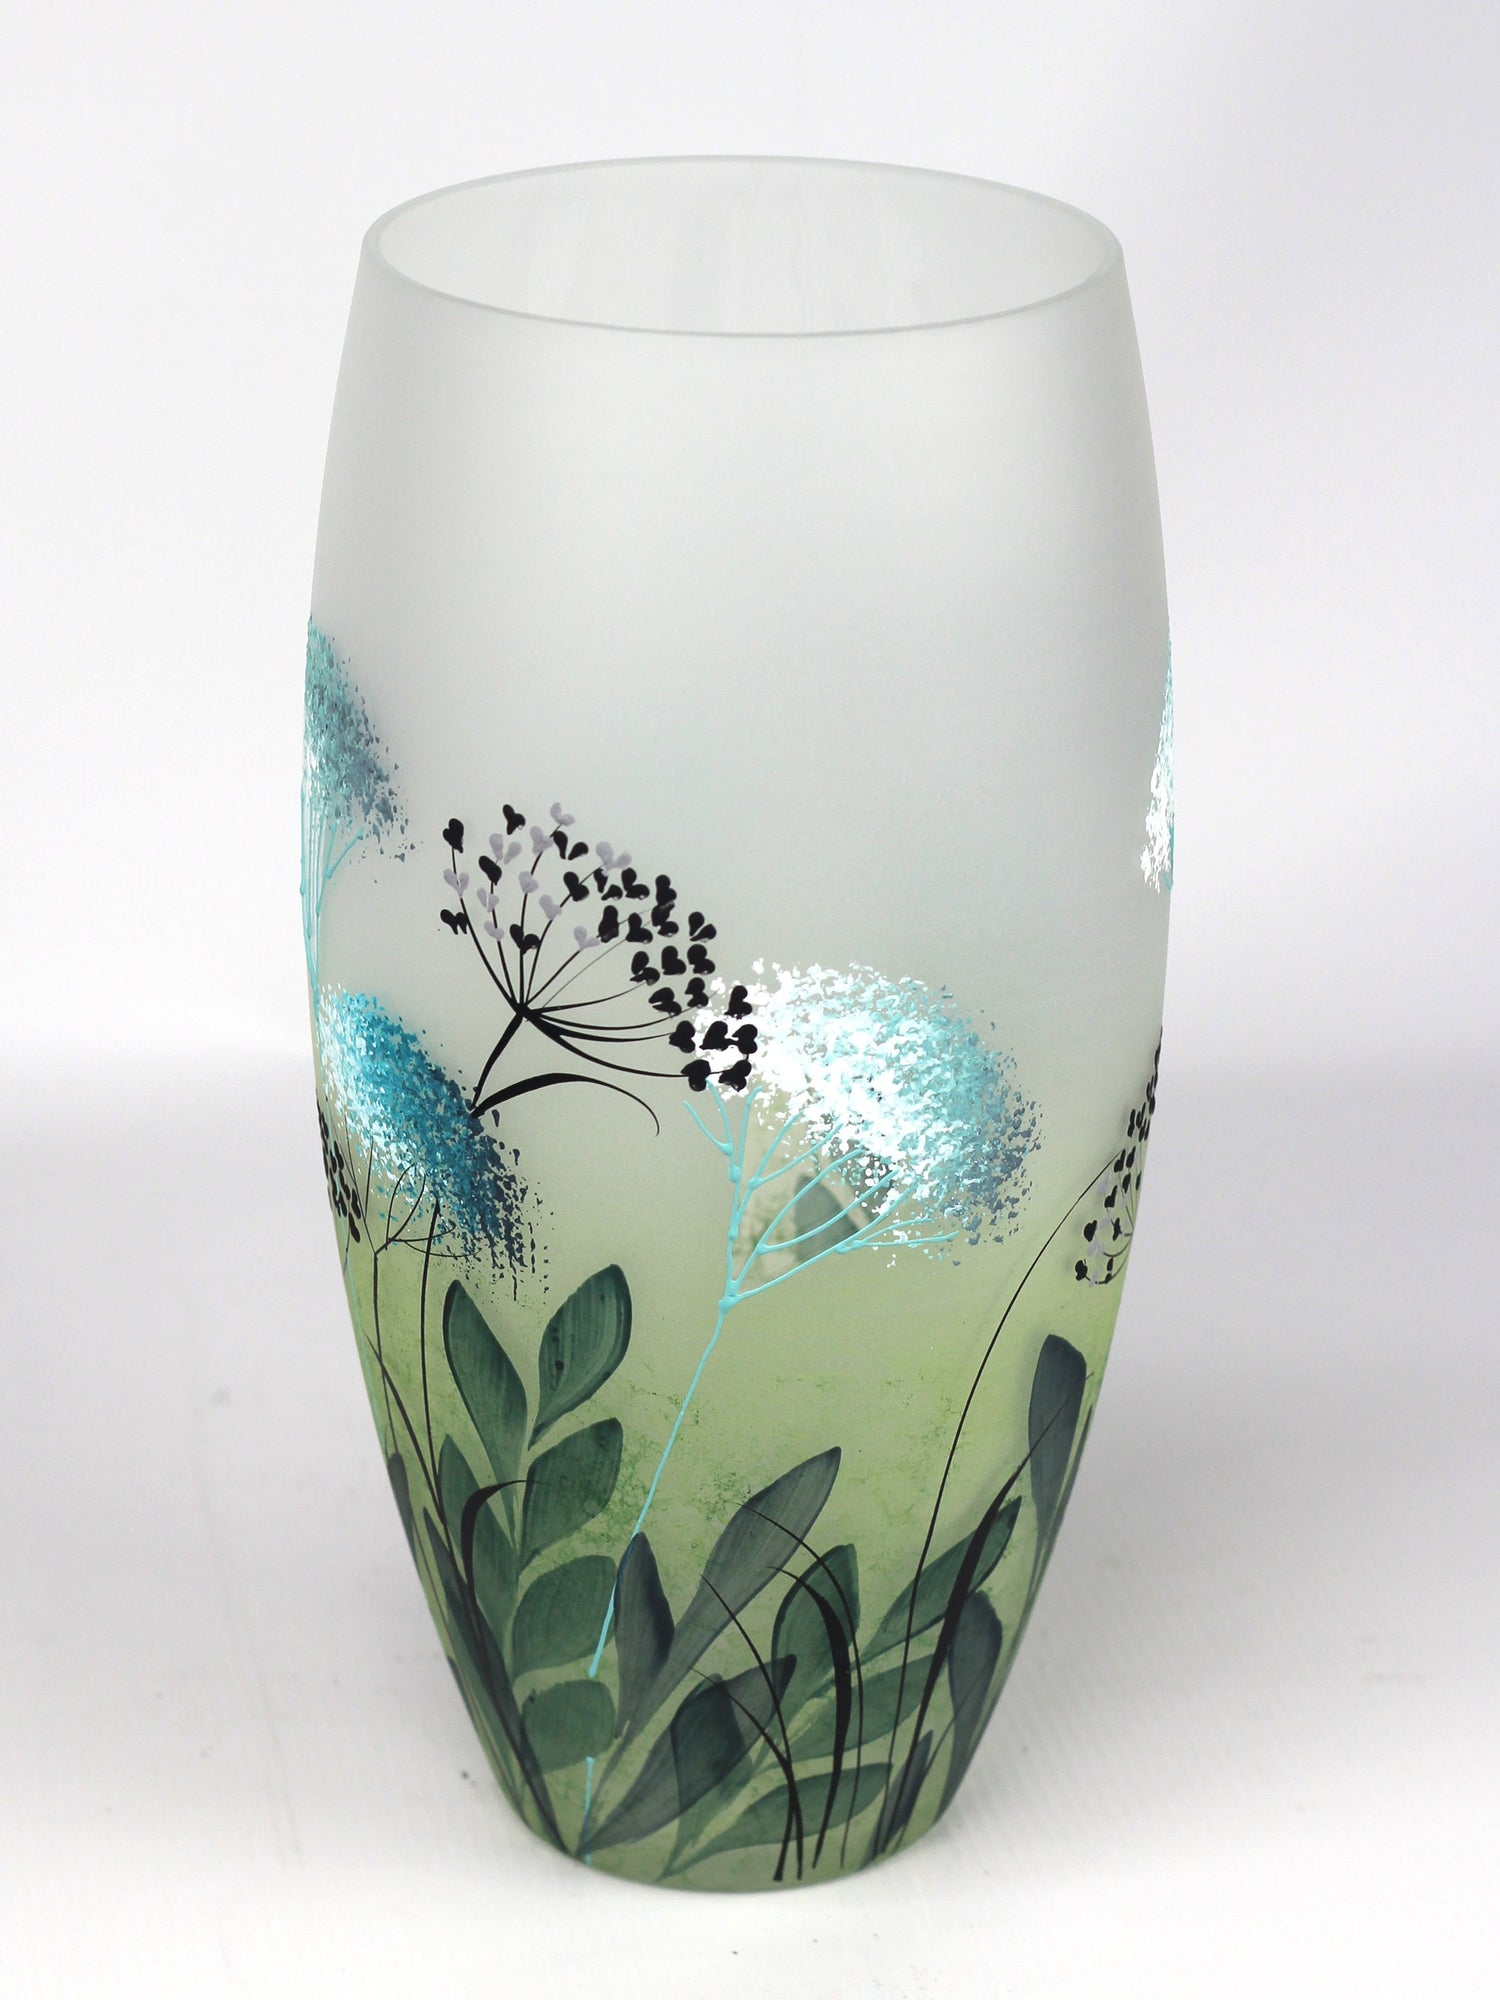 Table green art decorative glass vase, HAND PAINTED